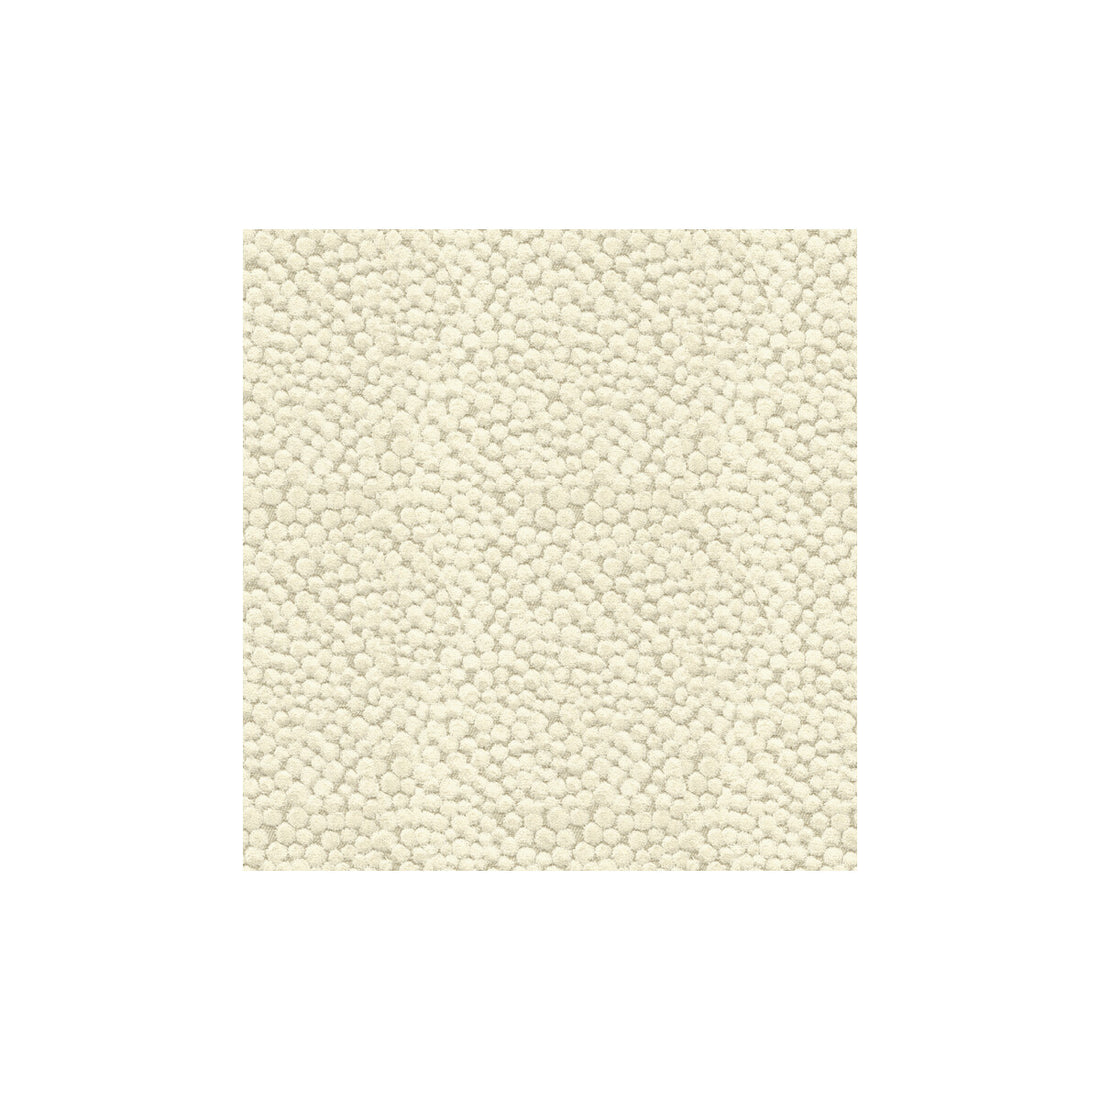 Lembury fabric in ivory color - pattern PF50300.104.0 - by Baker Lifestyle in the Denbury collection